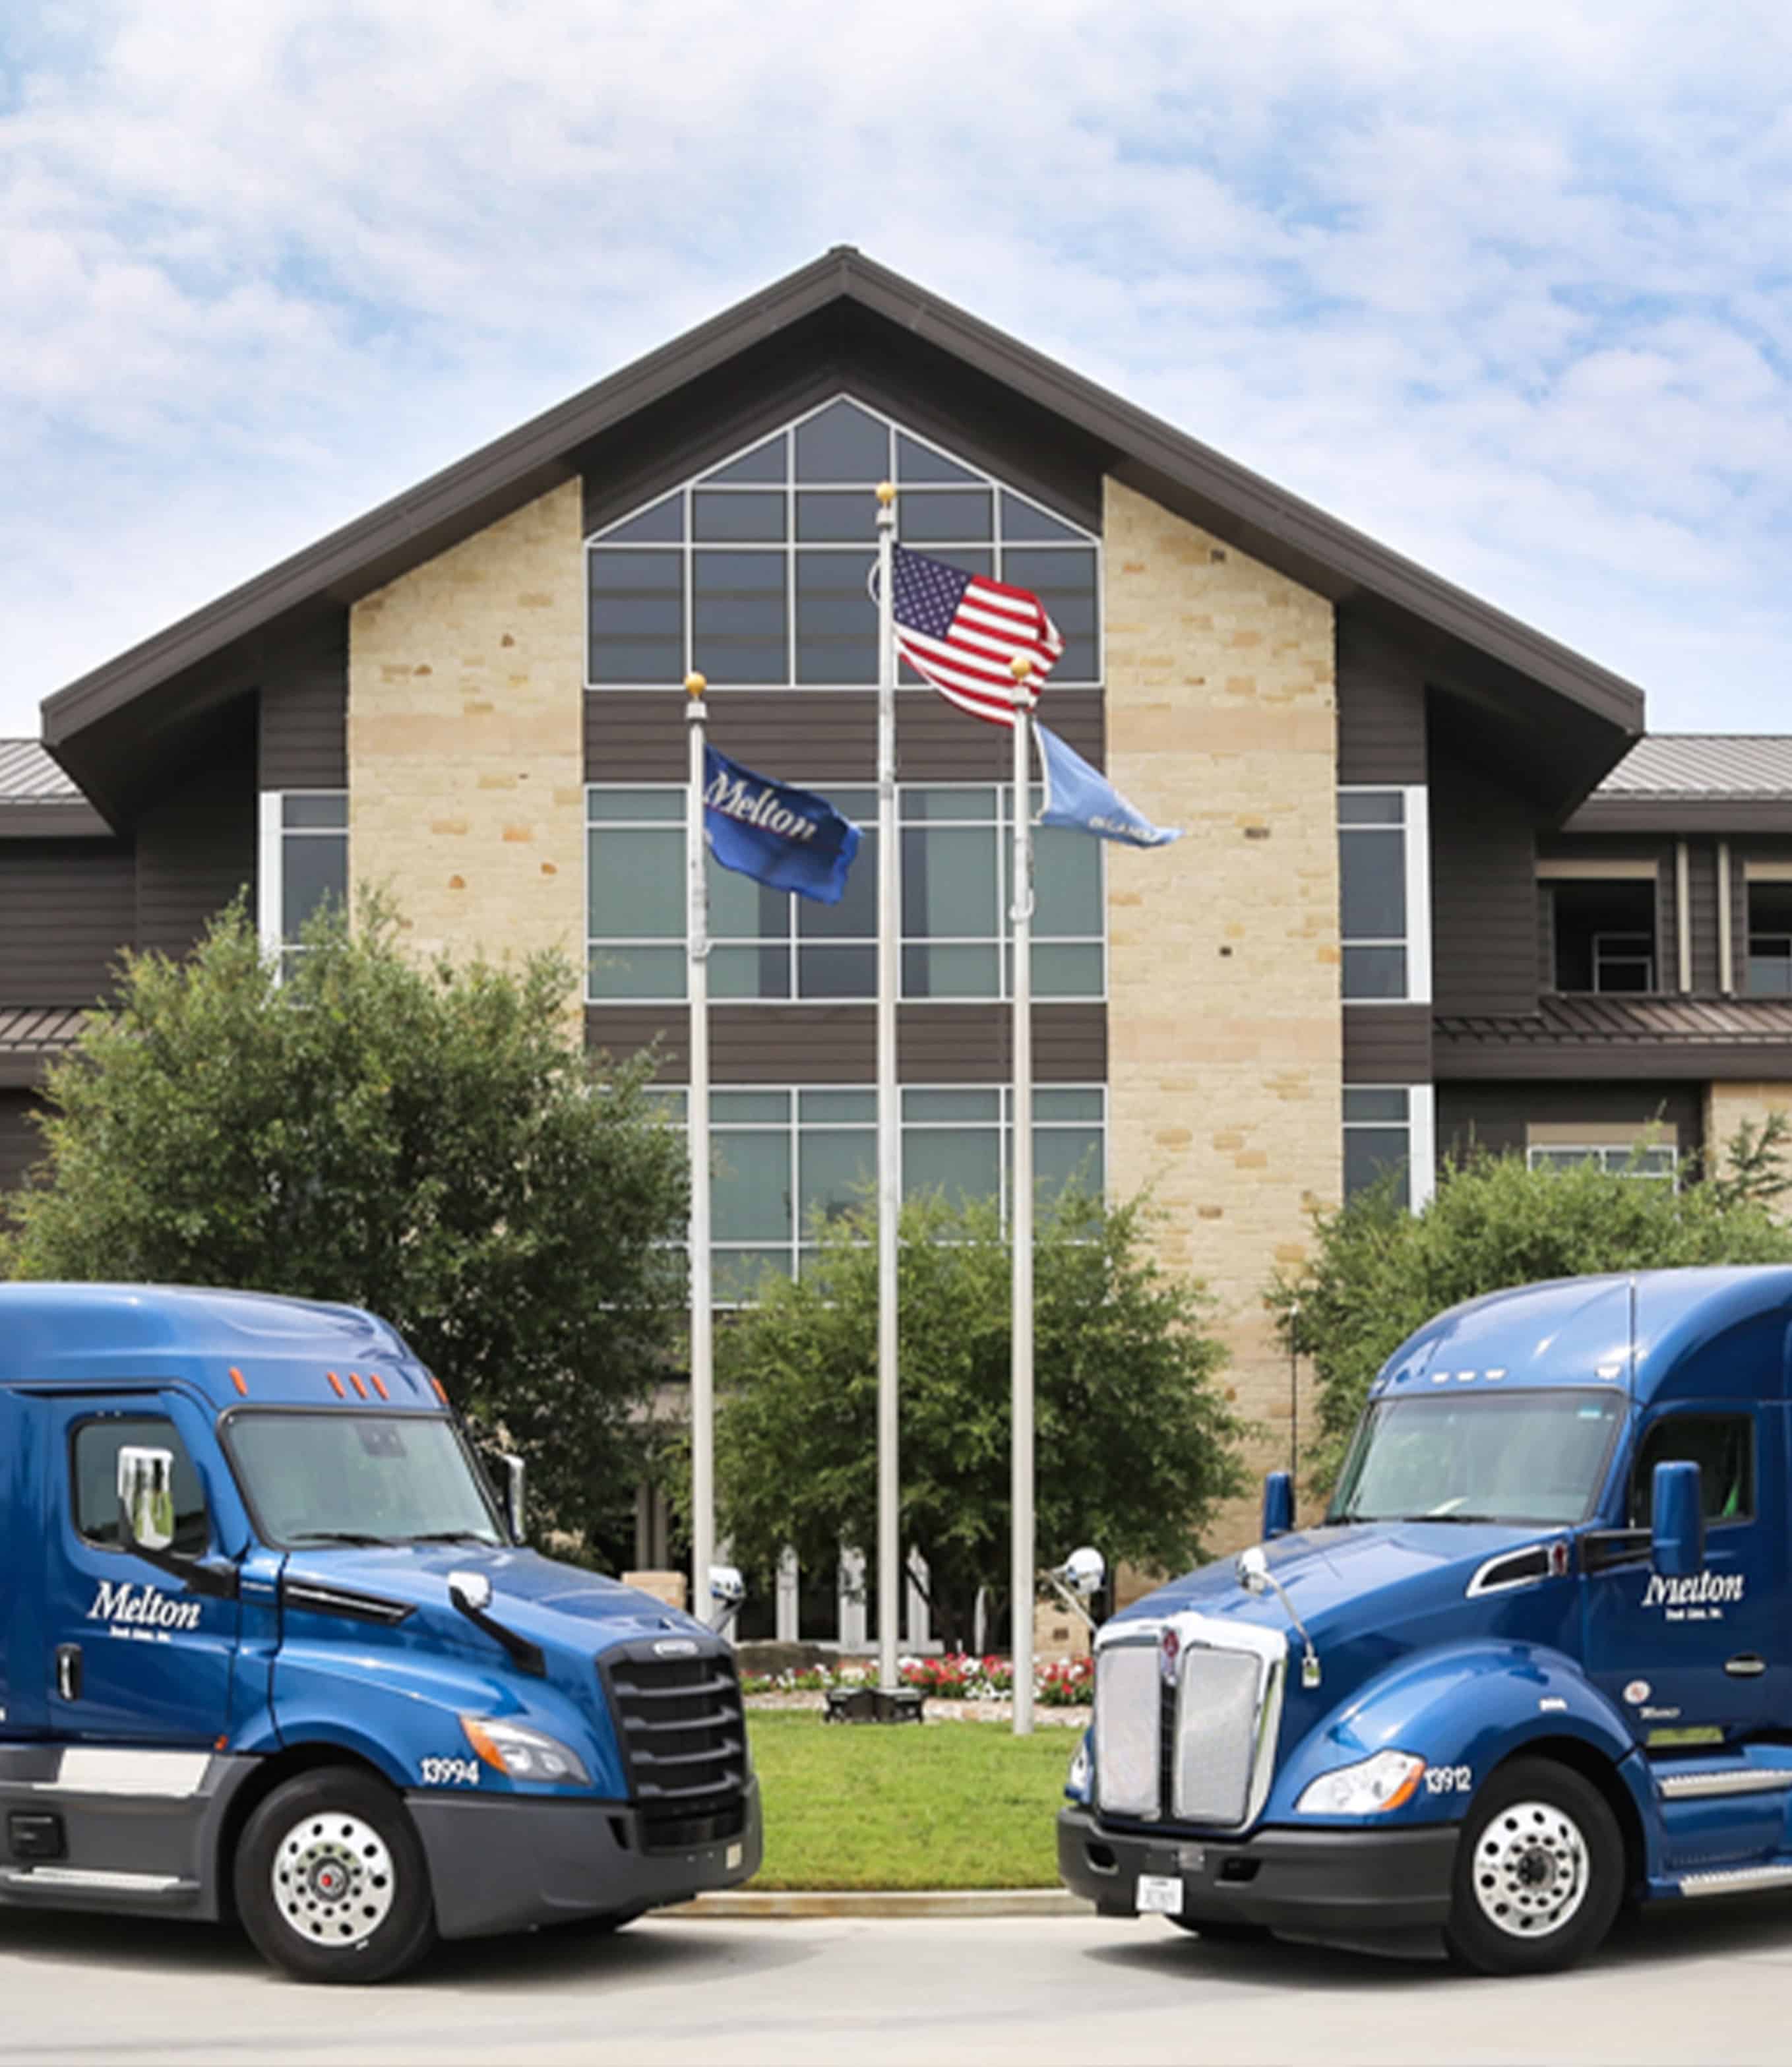 Two Melton trucks parked in front of the Melton Truck Lines headquarters.